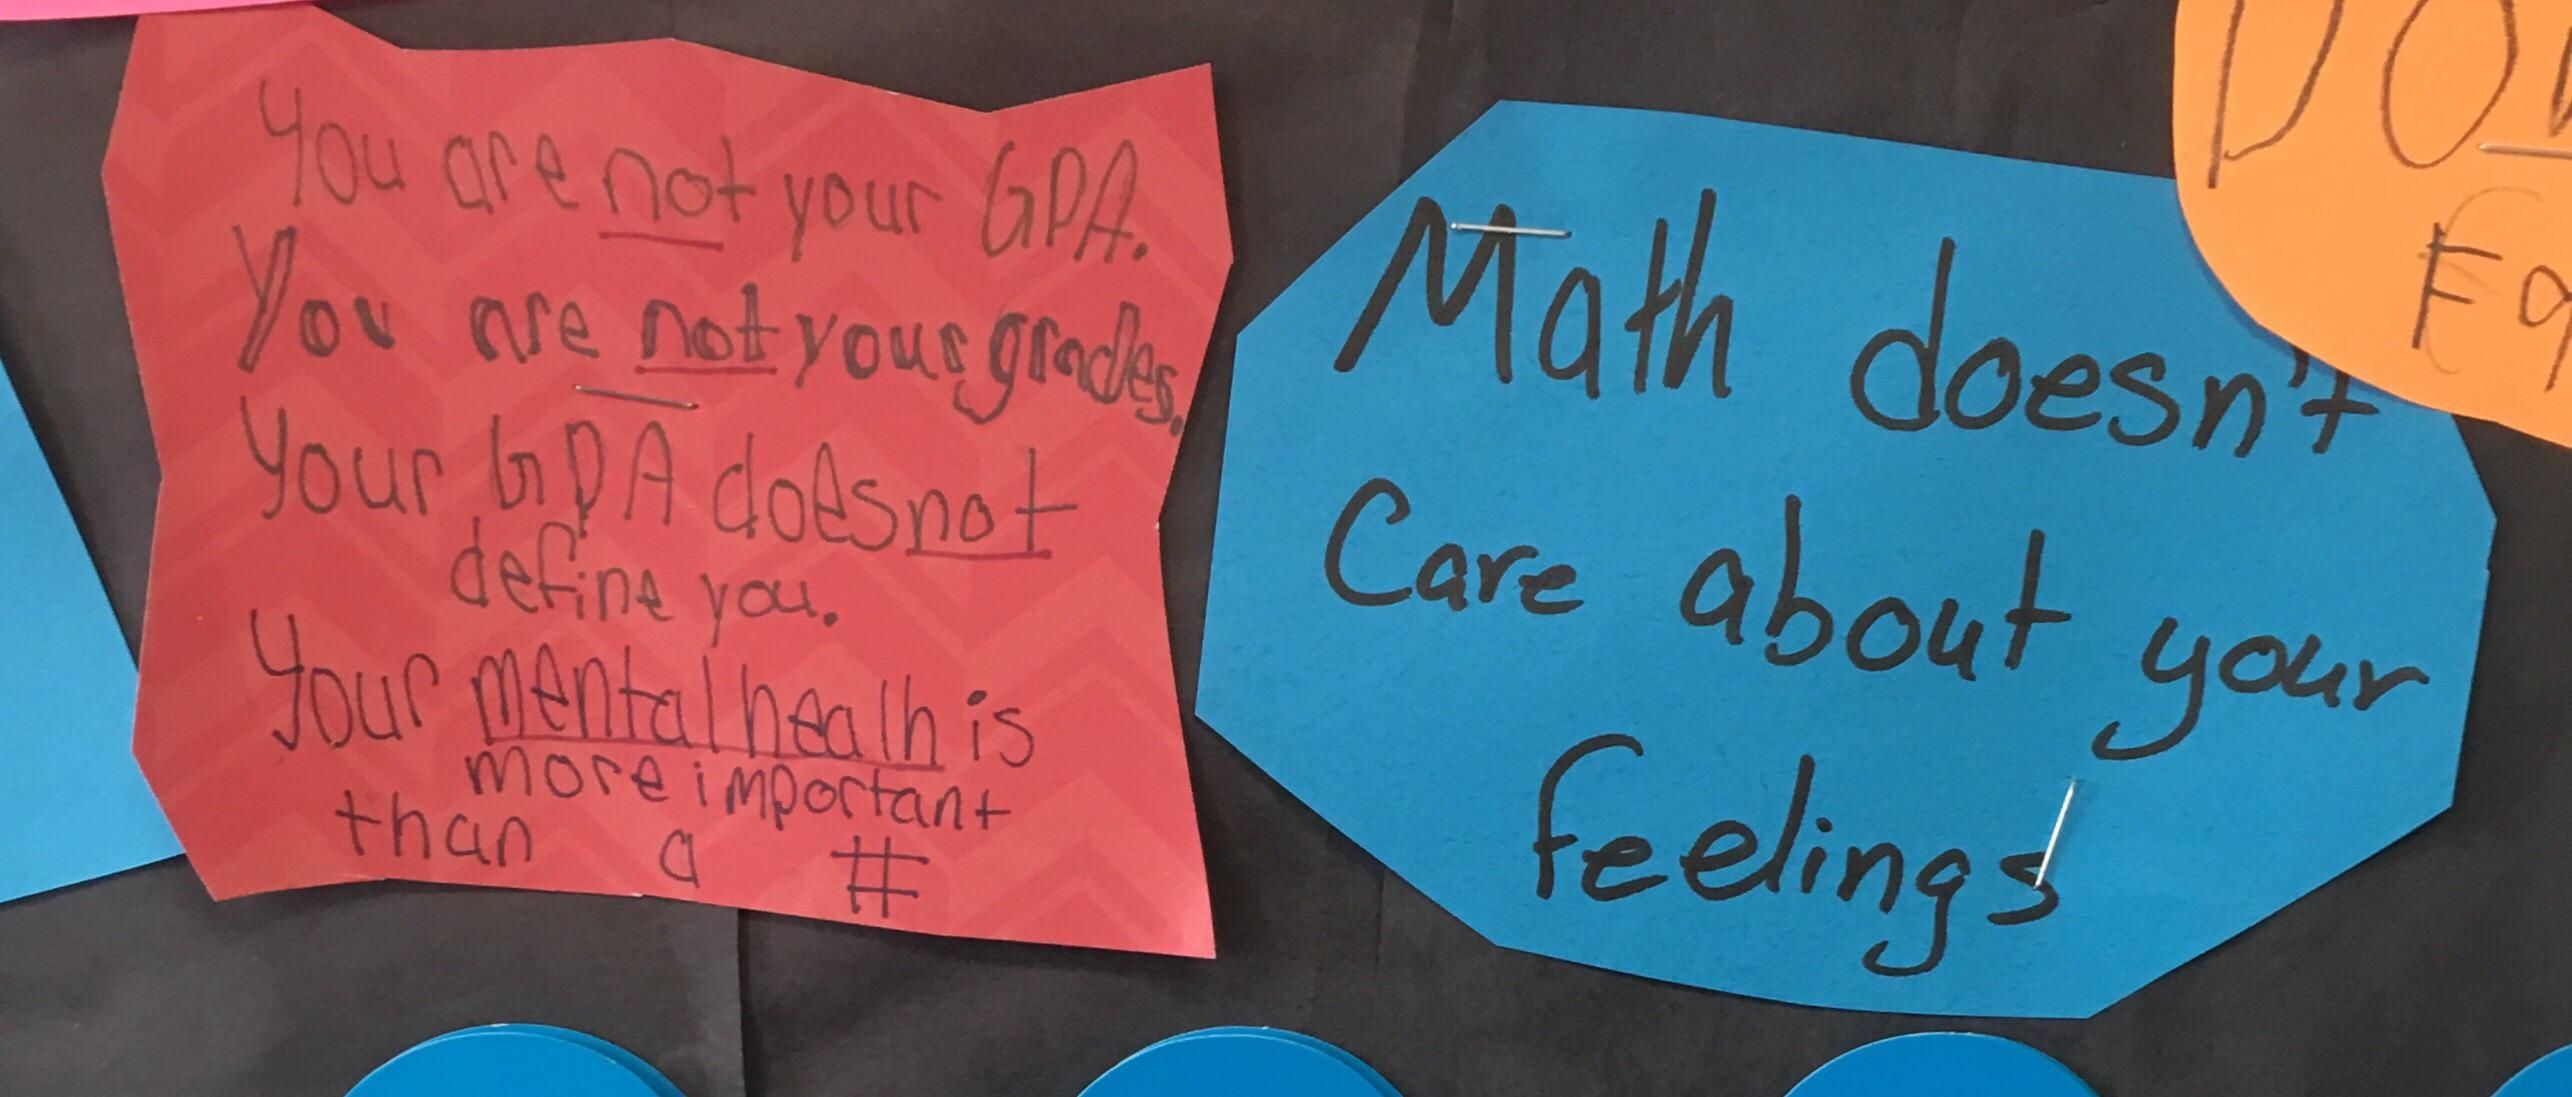 Two students with different messages on a math teacher’s “class tips” board